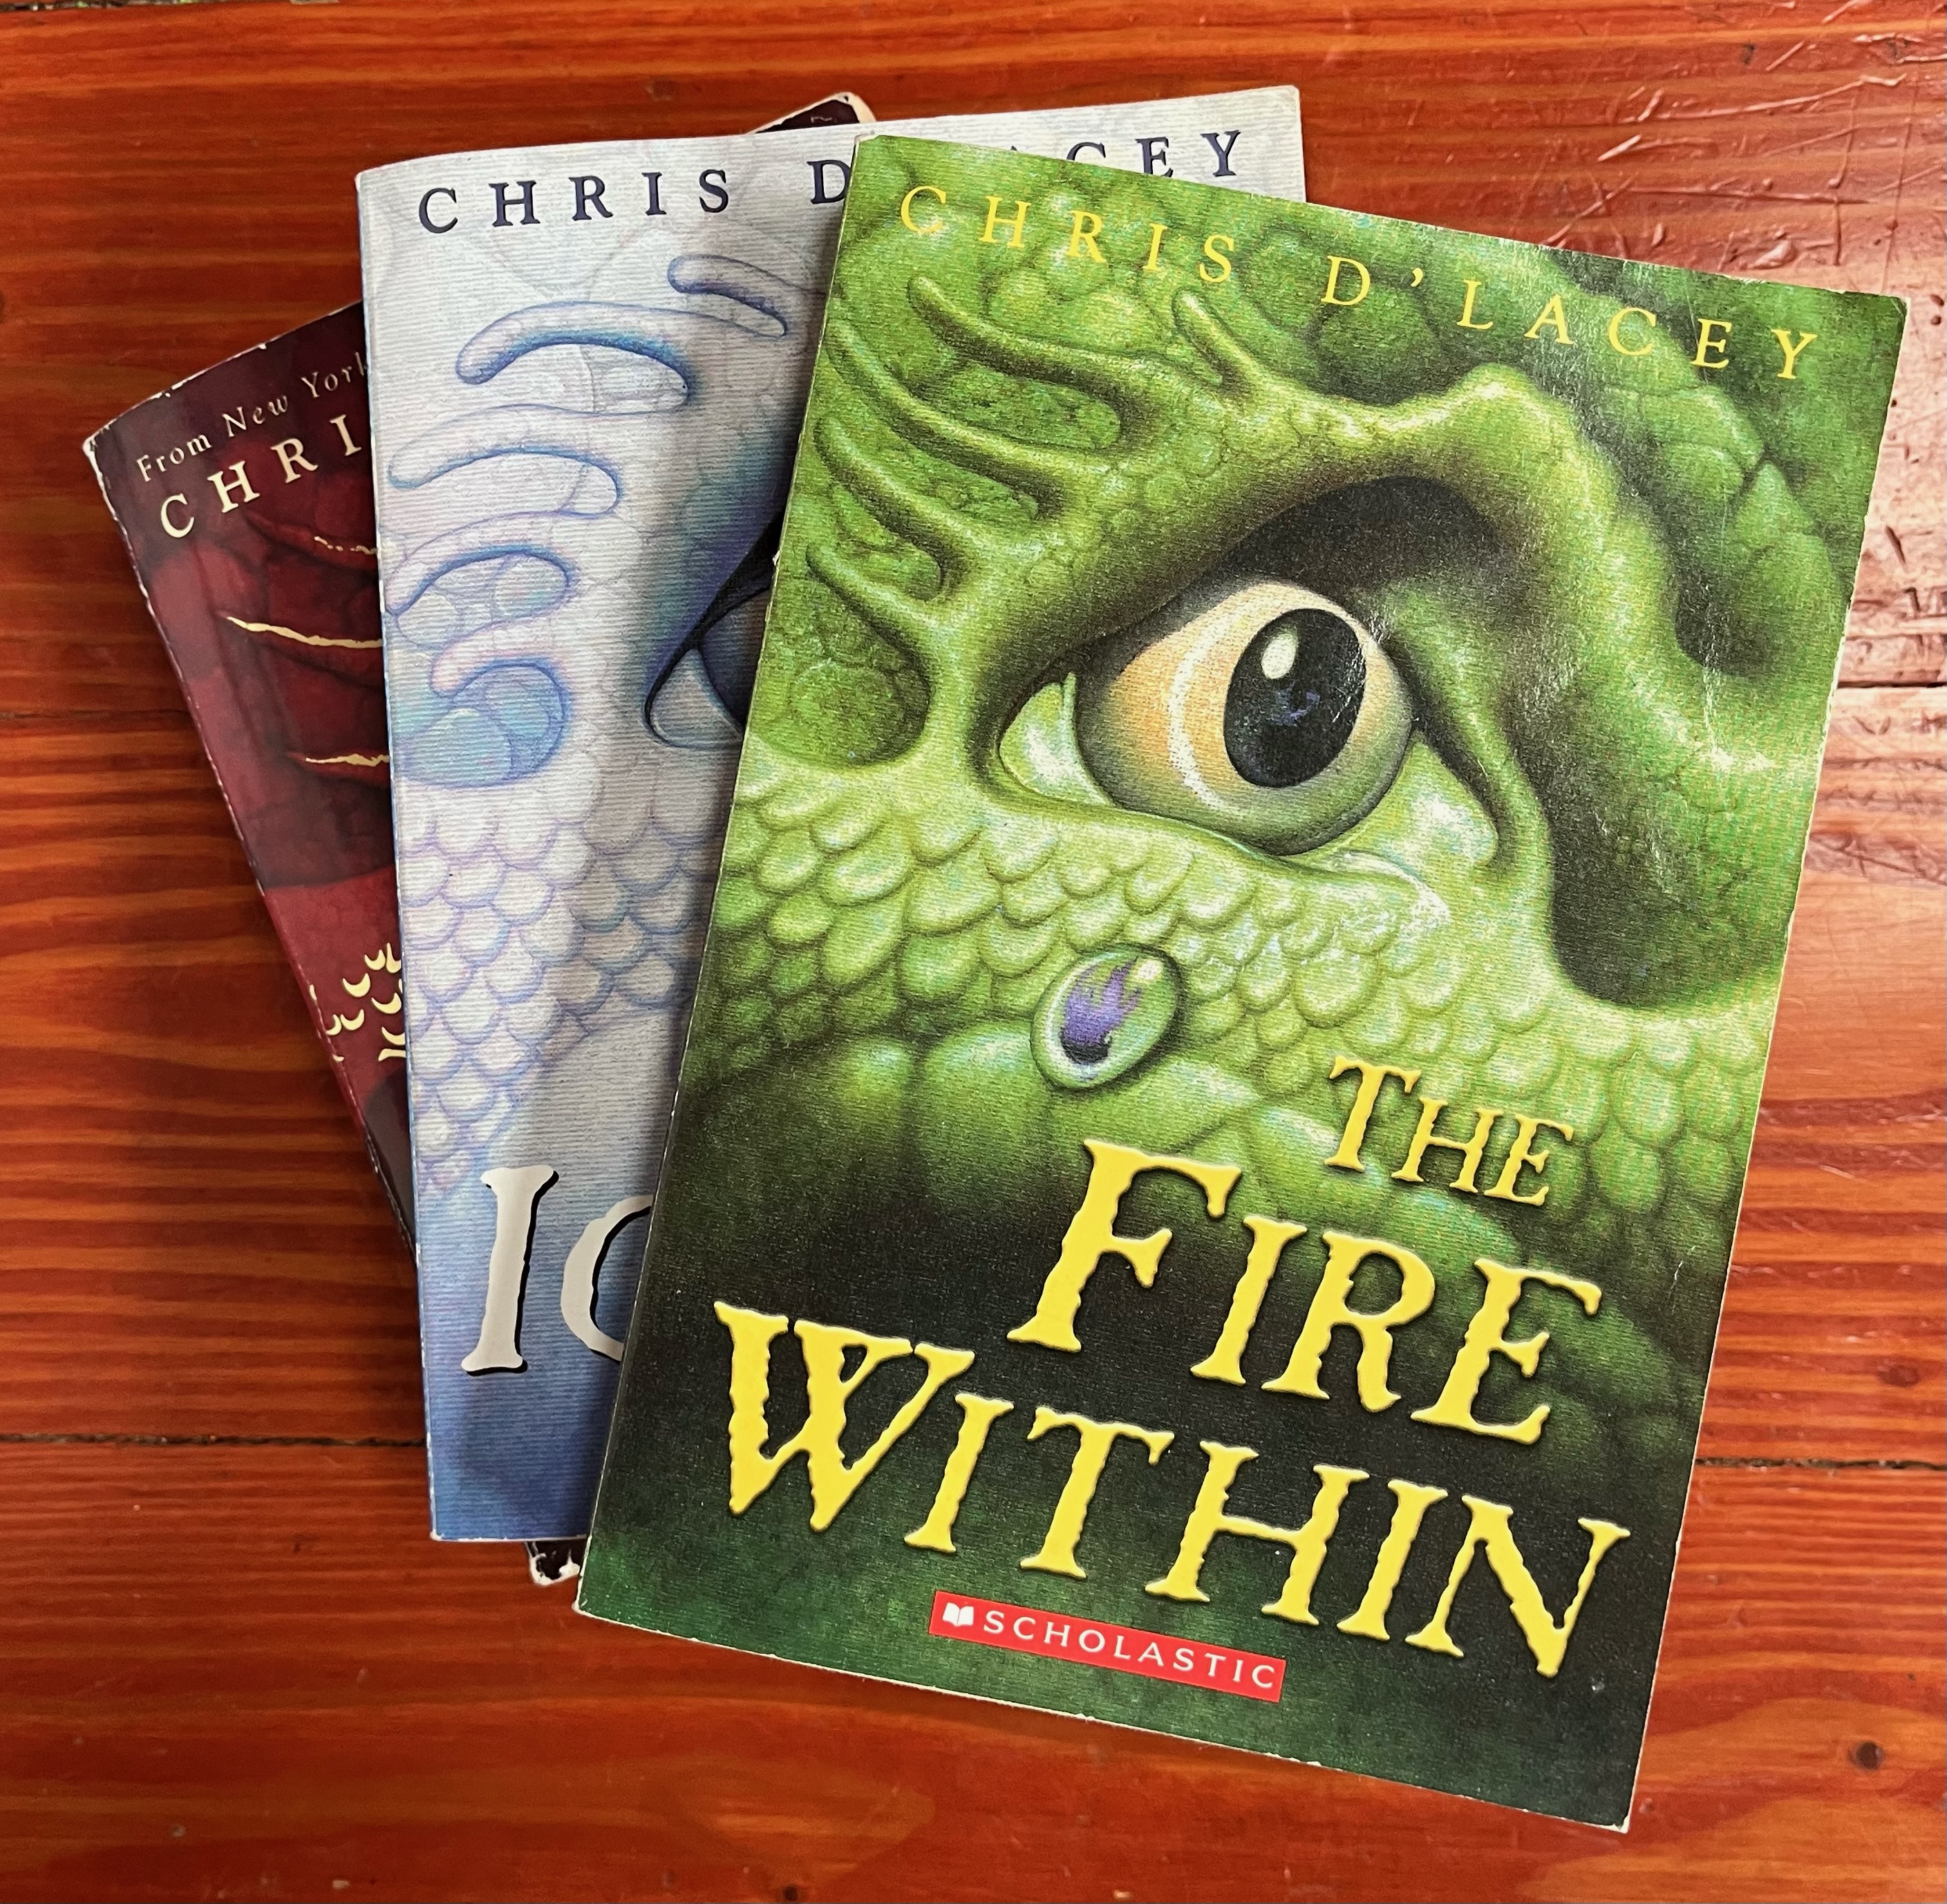 The Last Dragon Chronicles by Chris D'Lacey books one The Fire Within, two Ice Fire, and three Fire Star